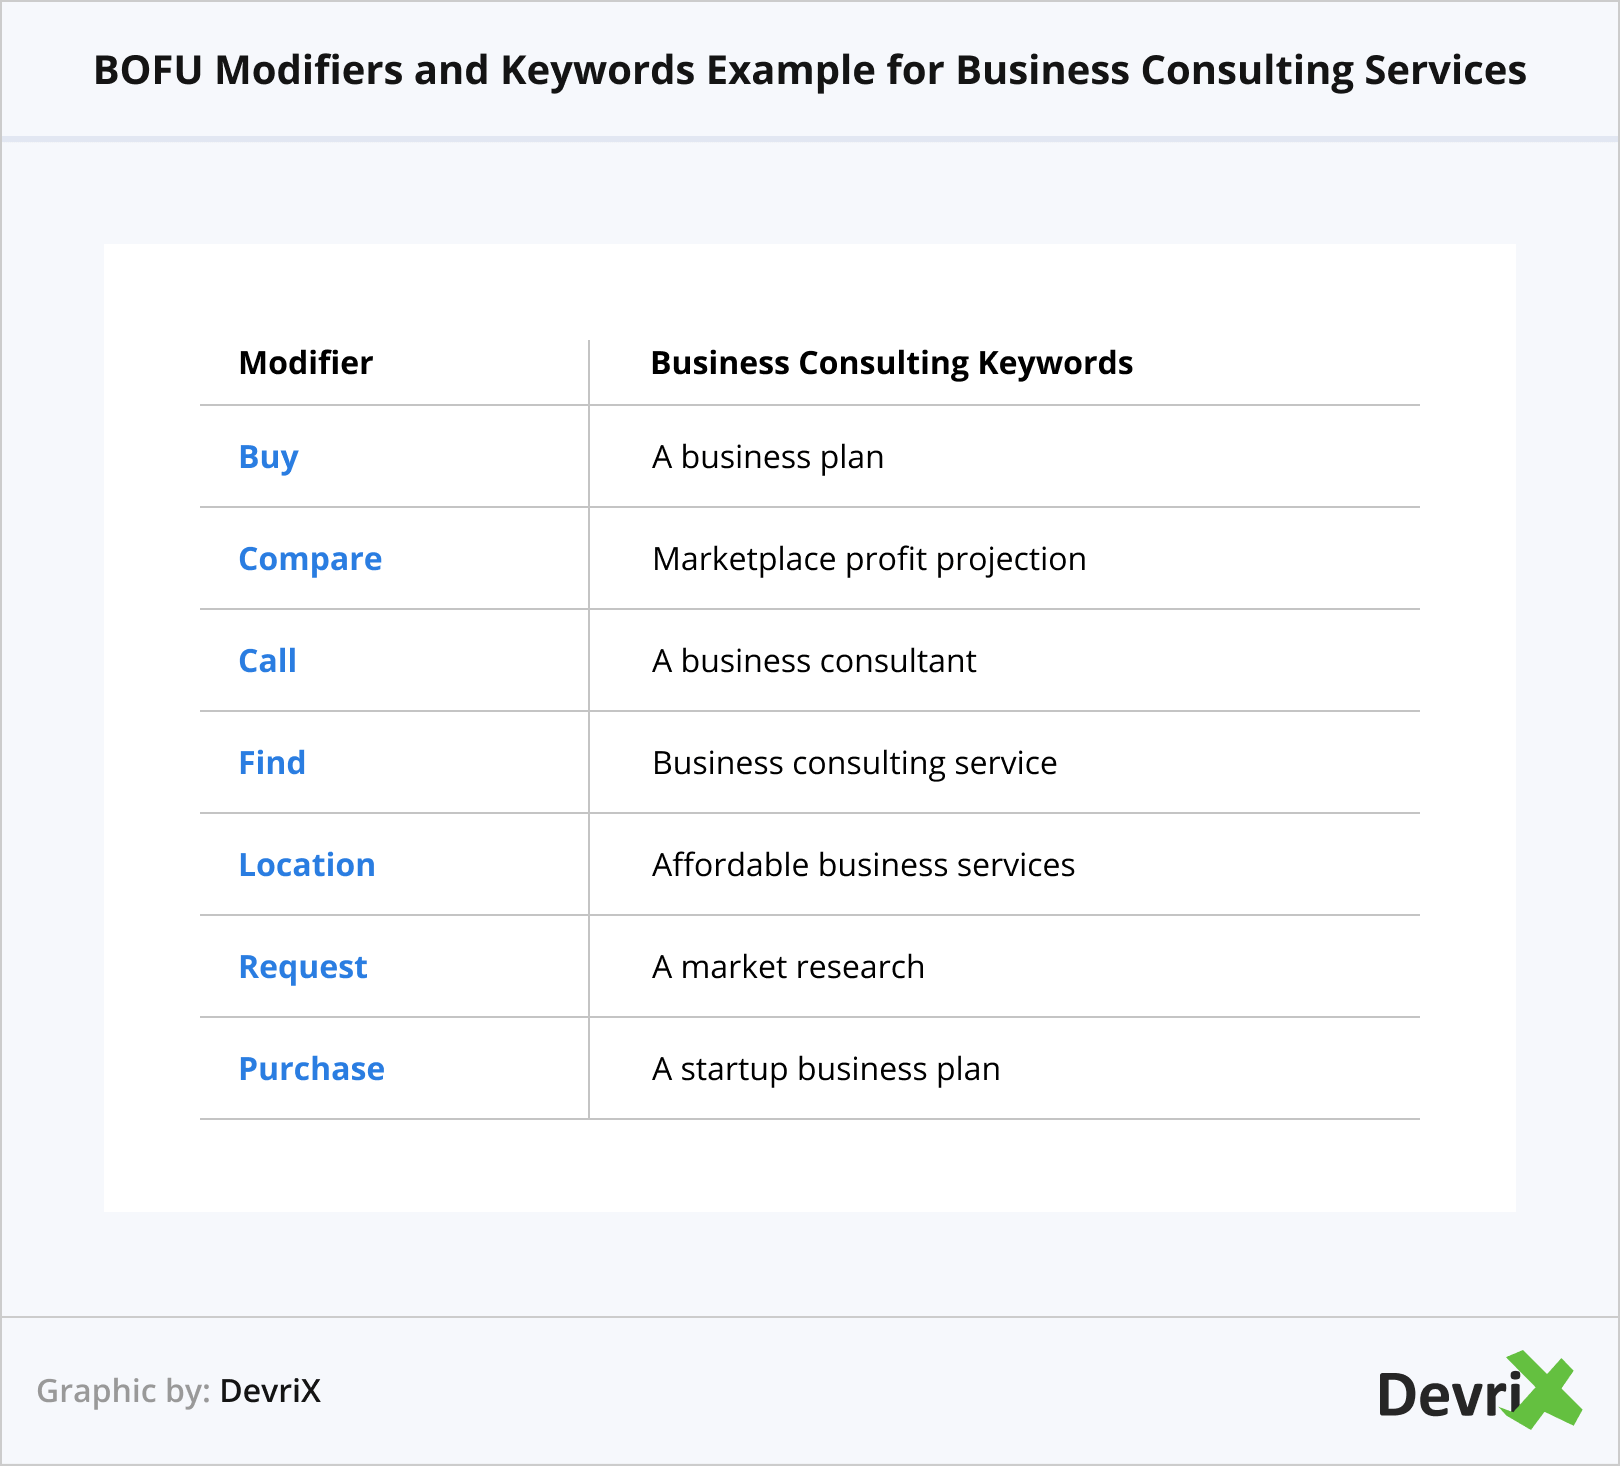 BOFU Modifiers and Keywords Example for Business Consulting Services